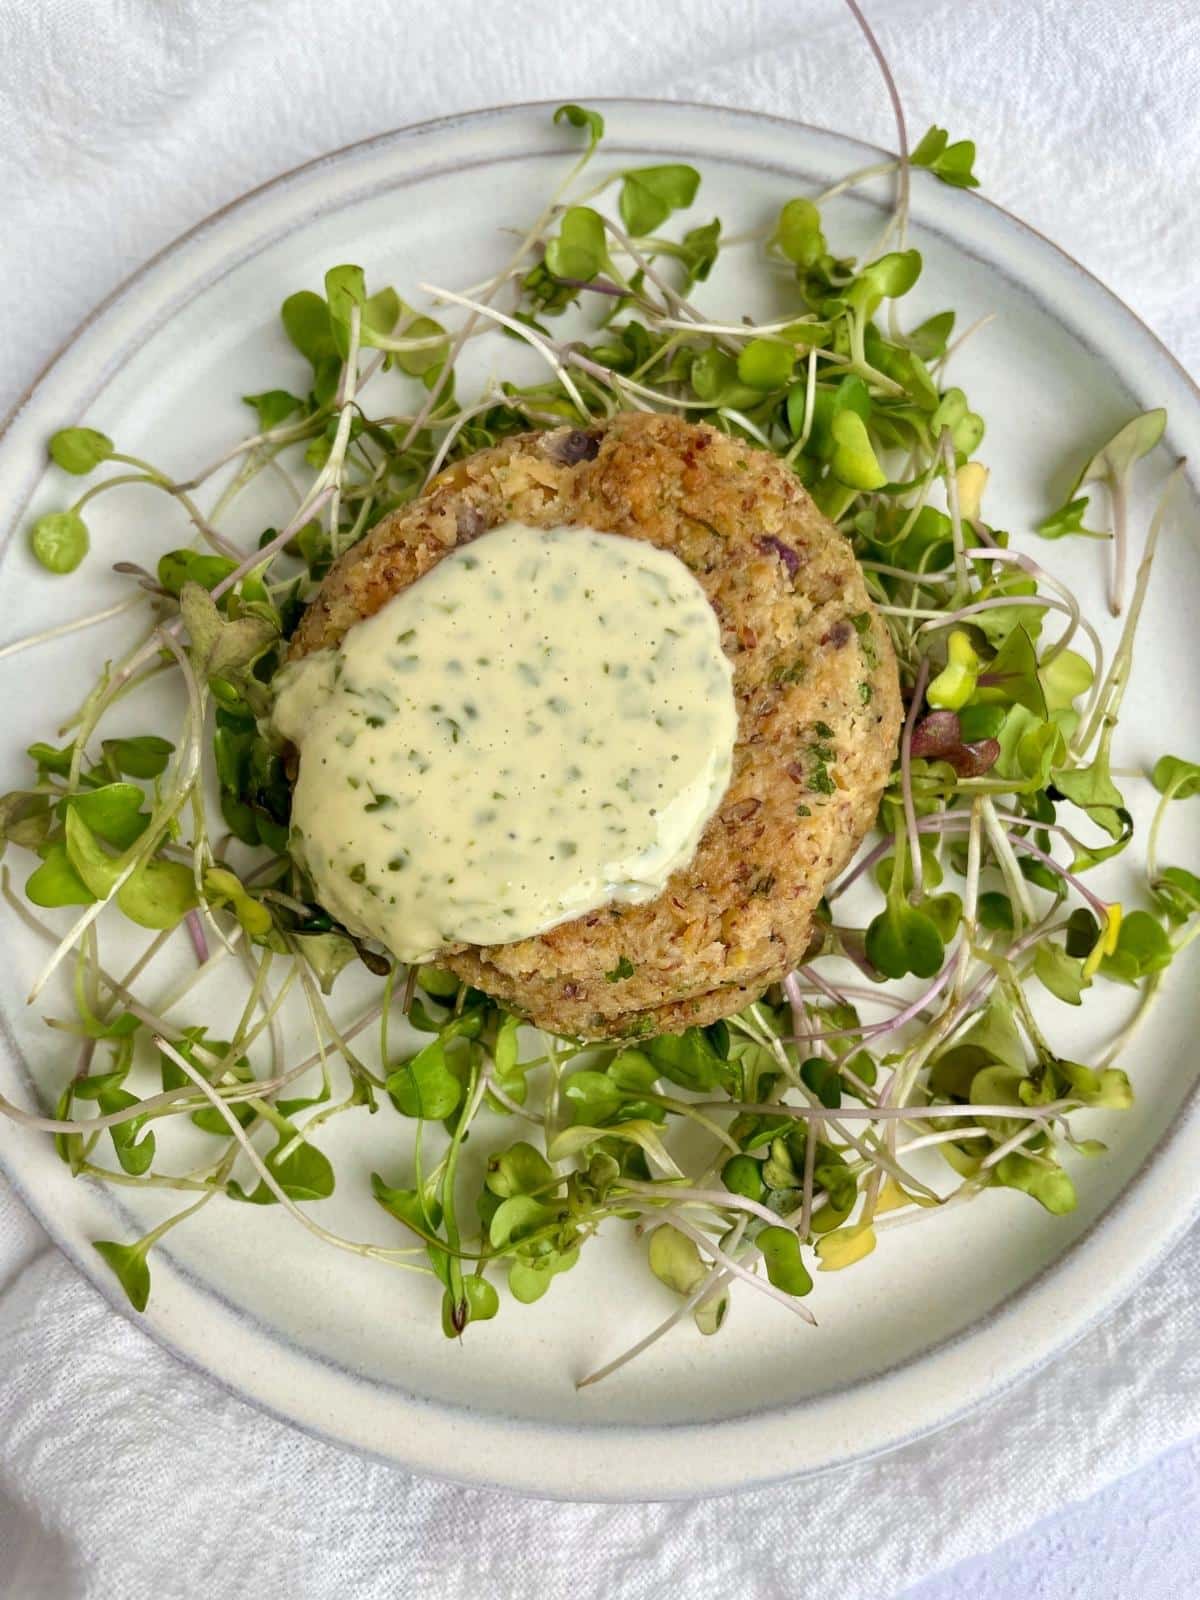 Herb tahini on a chickpea patty.